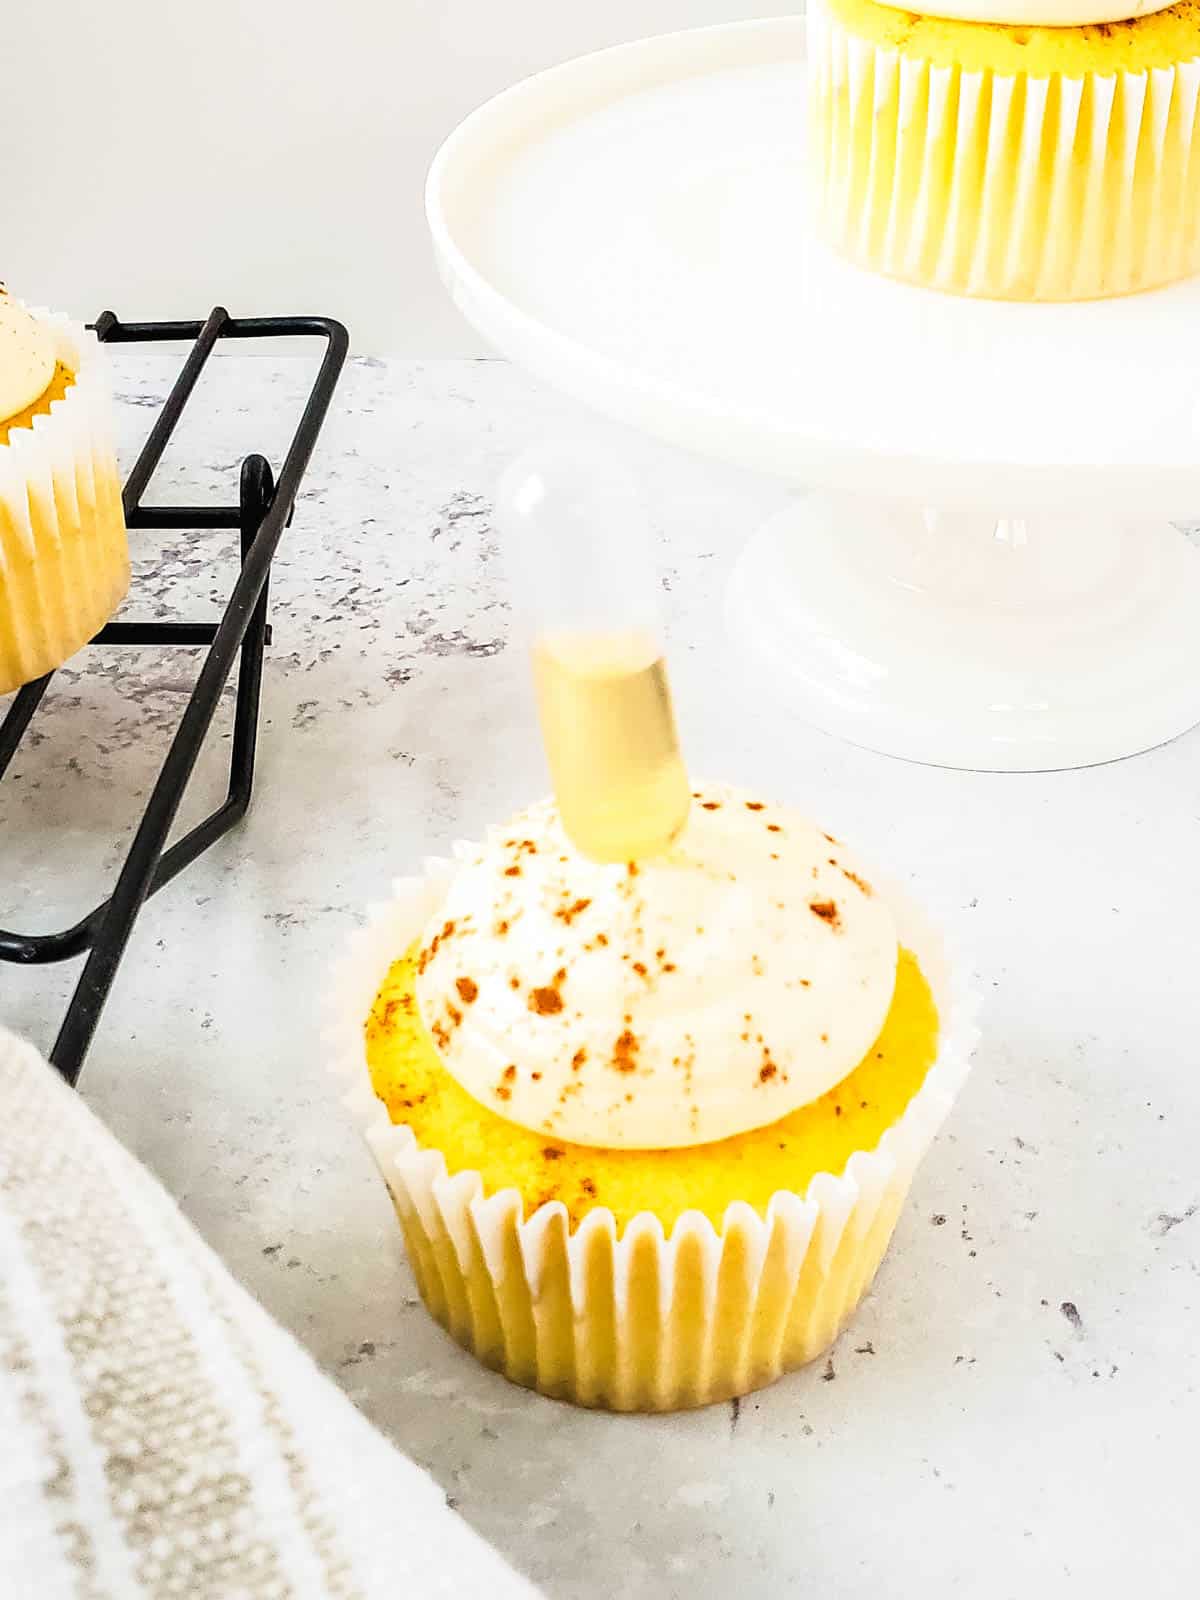 Spiced rum cupcake with pipettes sticking out and frosted and sprinkled with cinnamon.